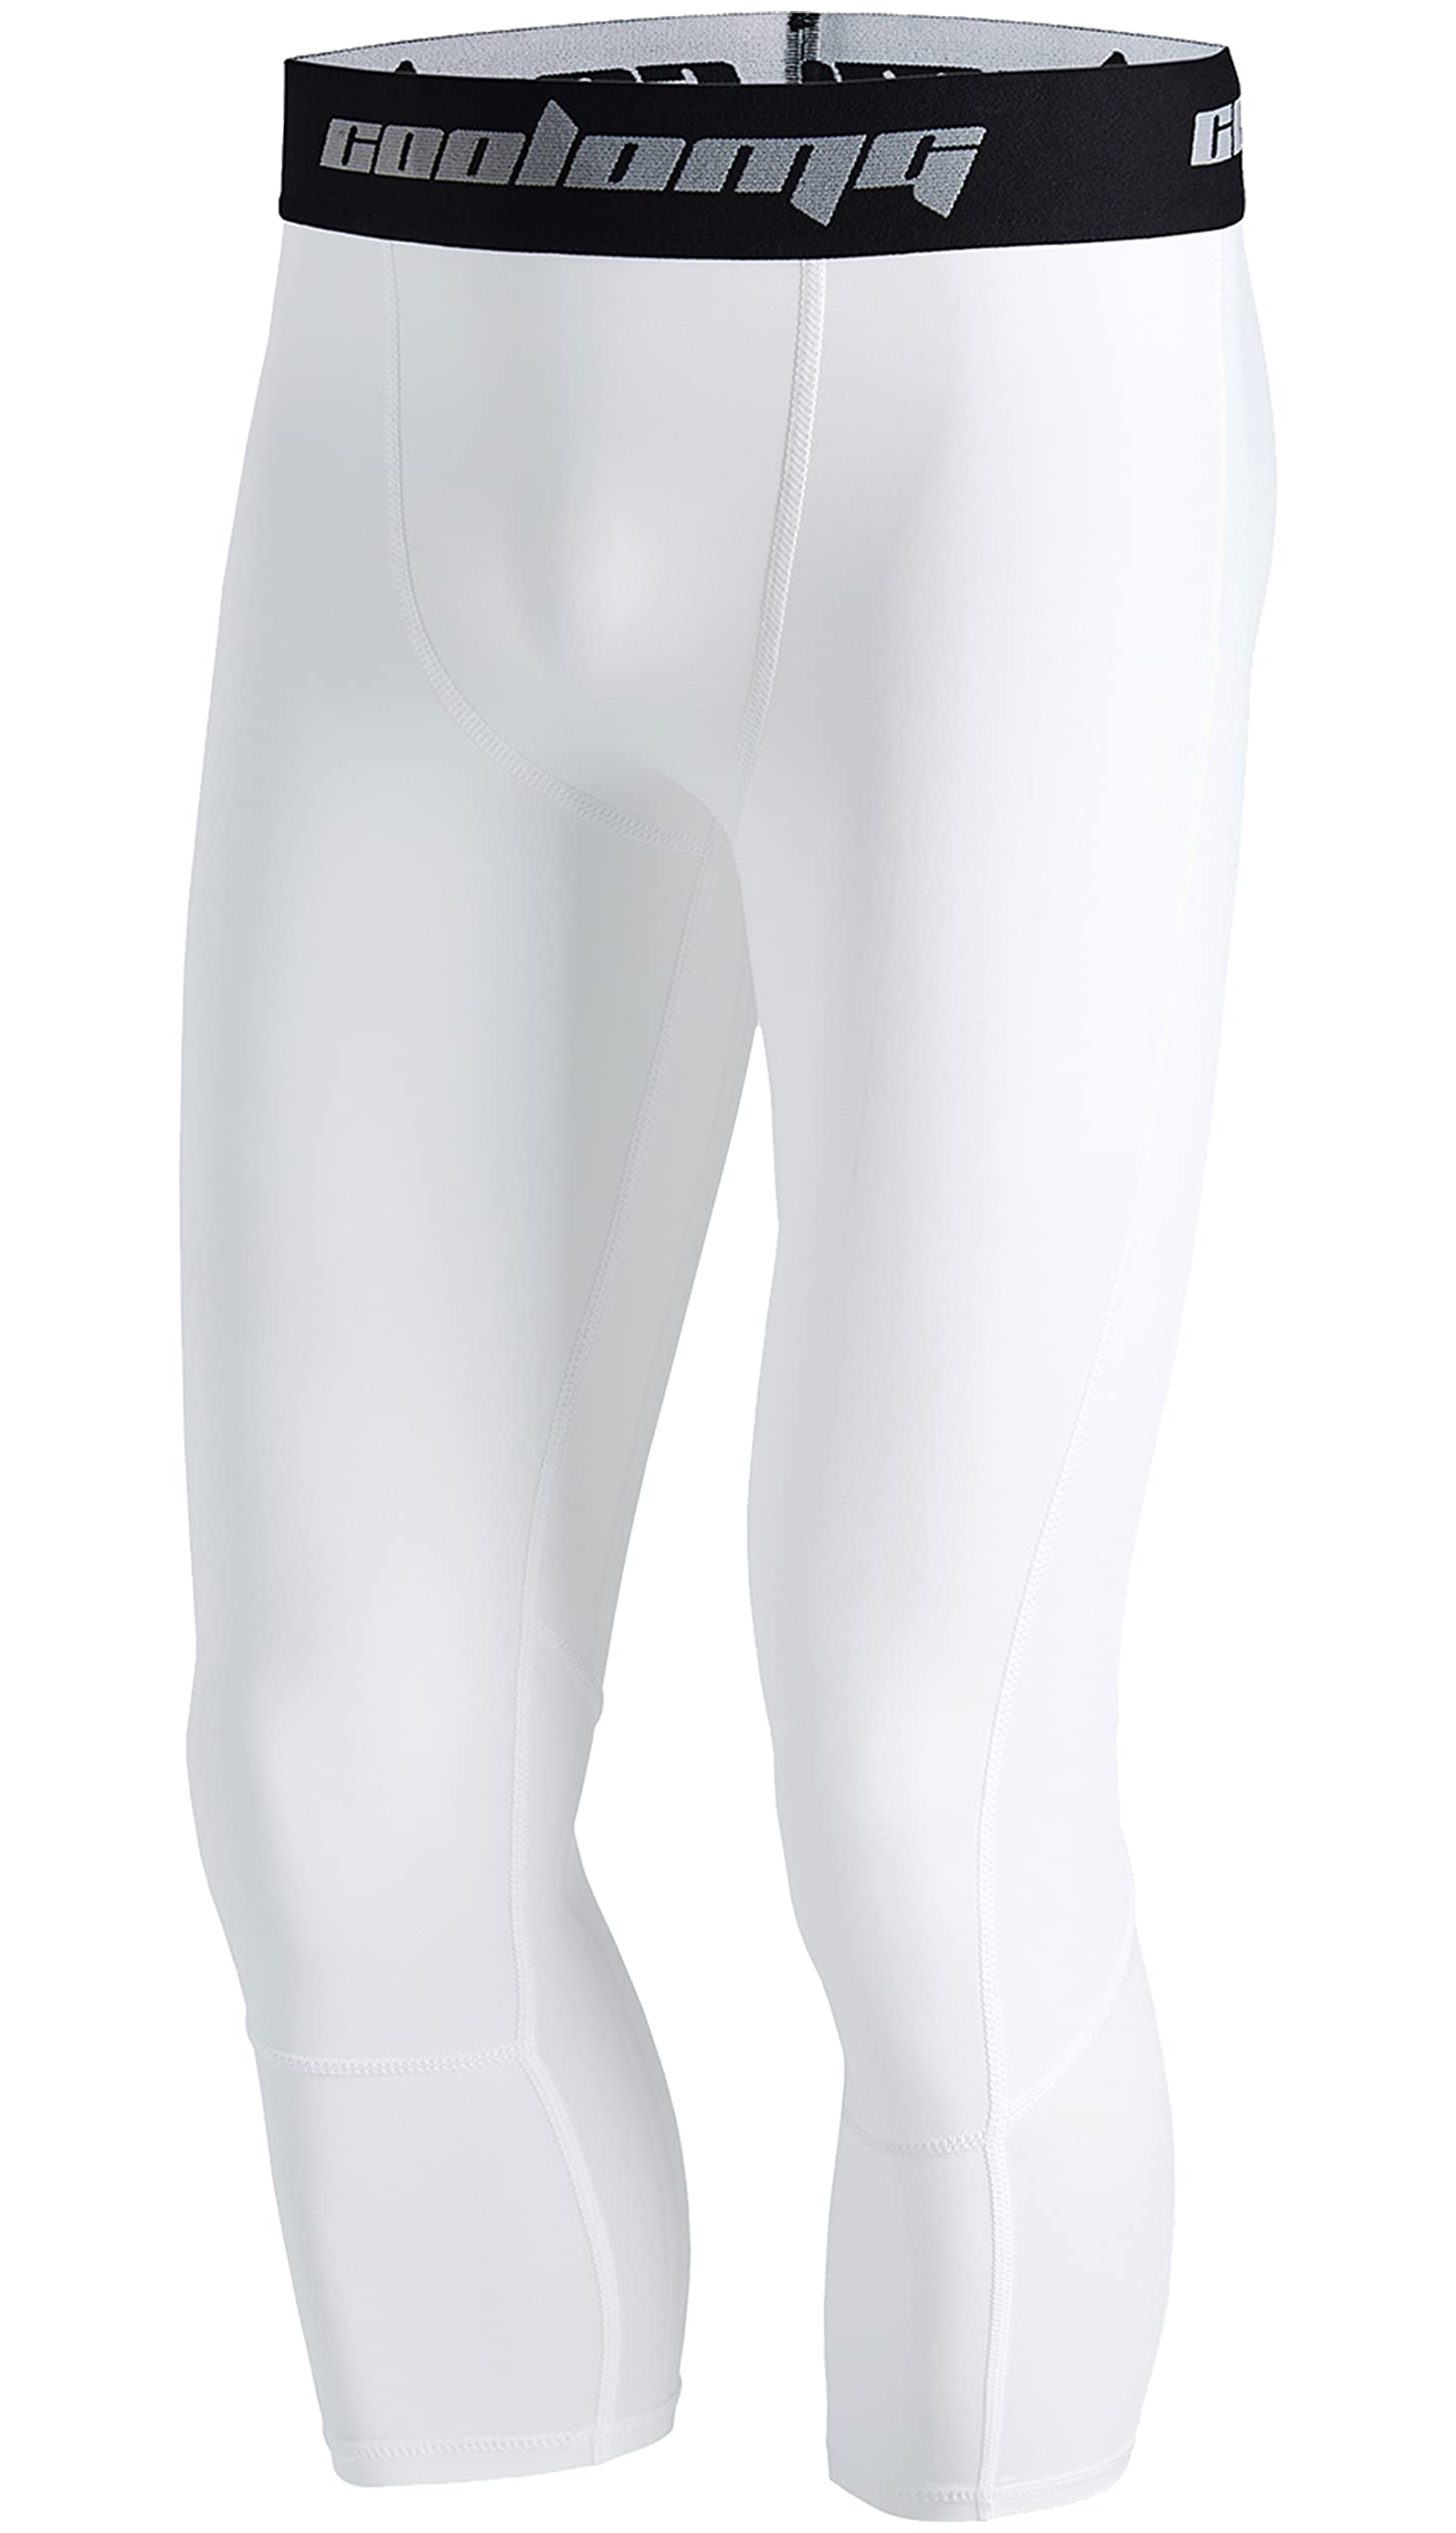 COOLOMG Youth Boys Compression Pants 3/4 Basketball Baselayer Sports Tights  Running Training Leggings Capris White X-Large